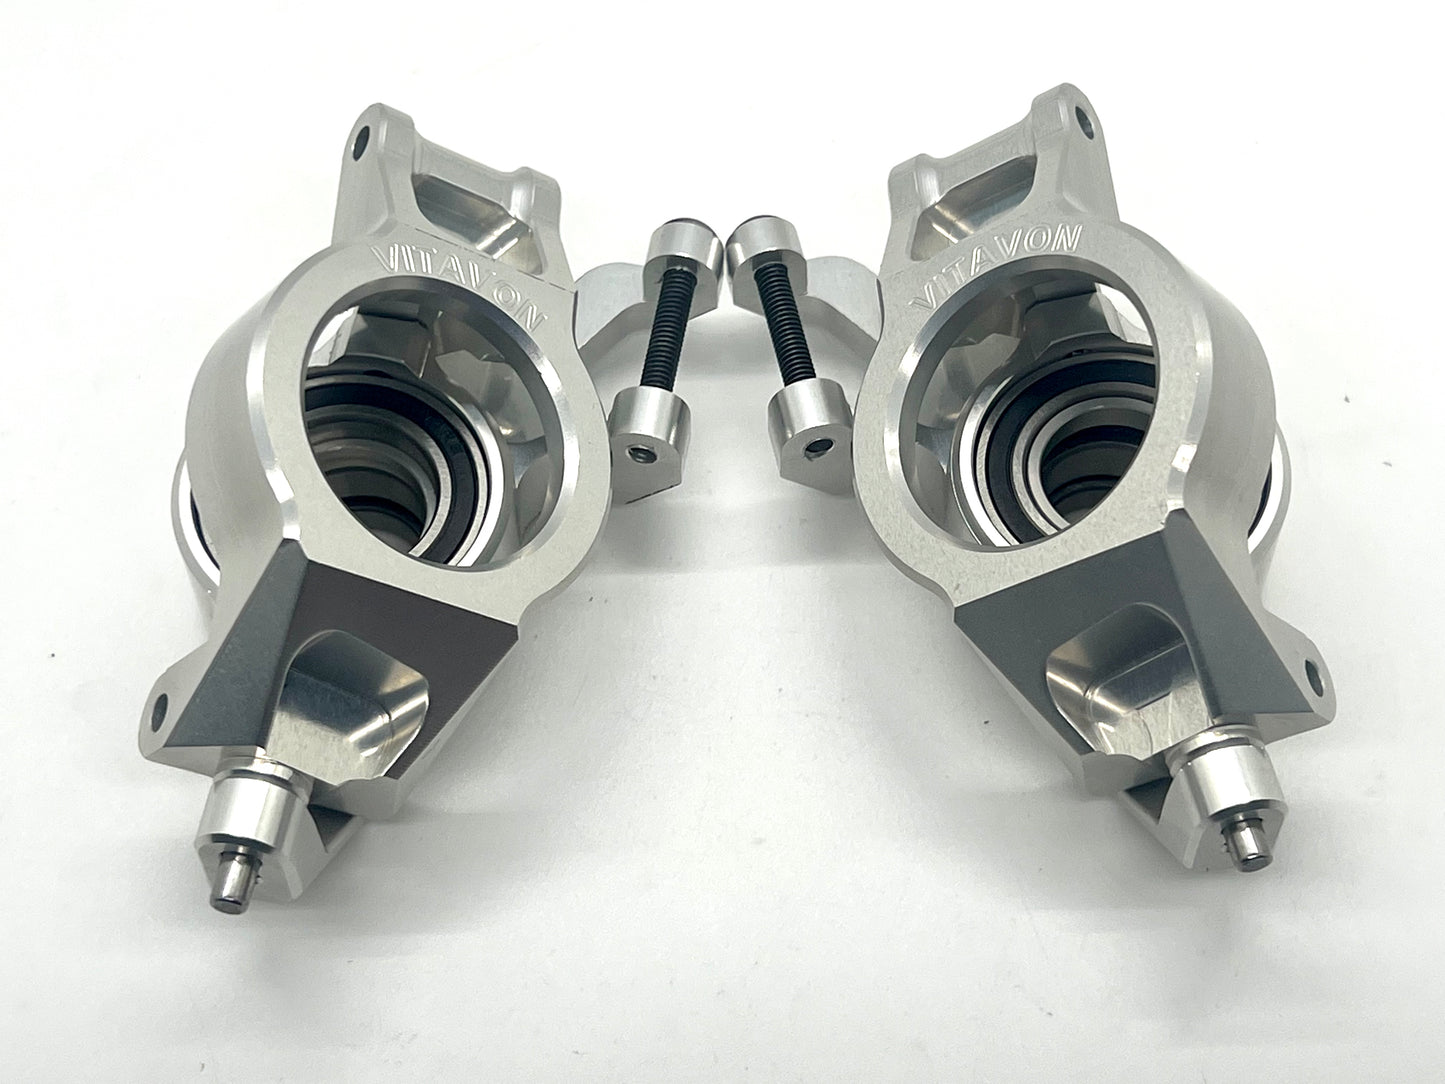 VITAVON Redesigned 7075 Front Knuckles+ C hub for XRT X-MAXX SILVER